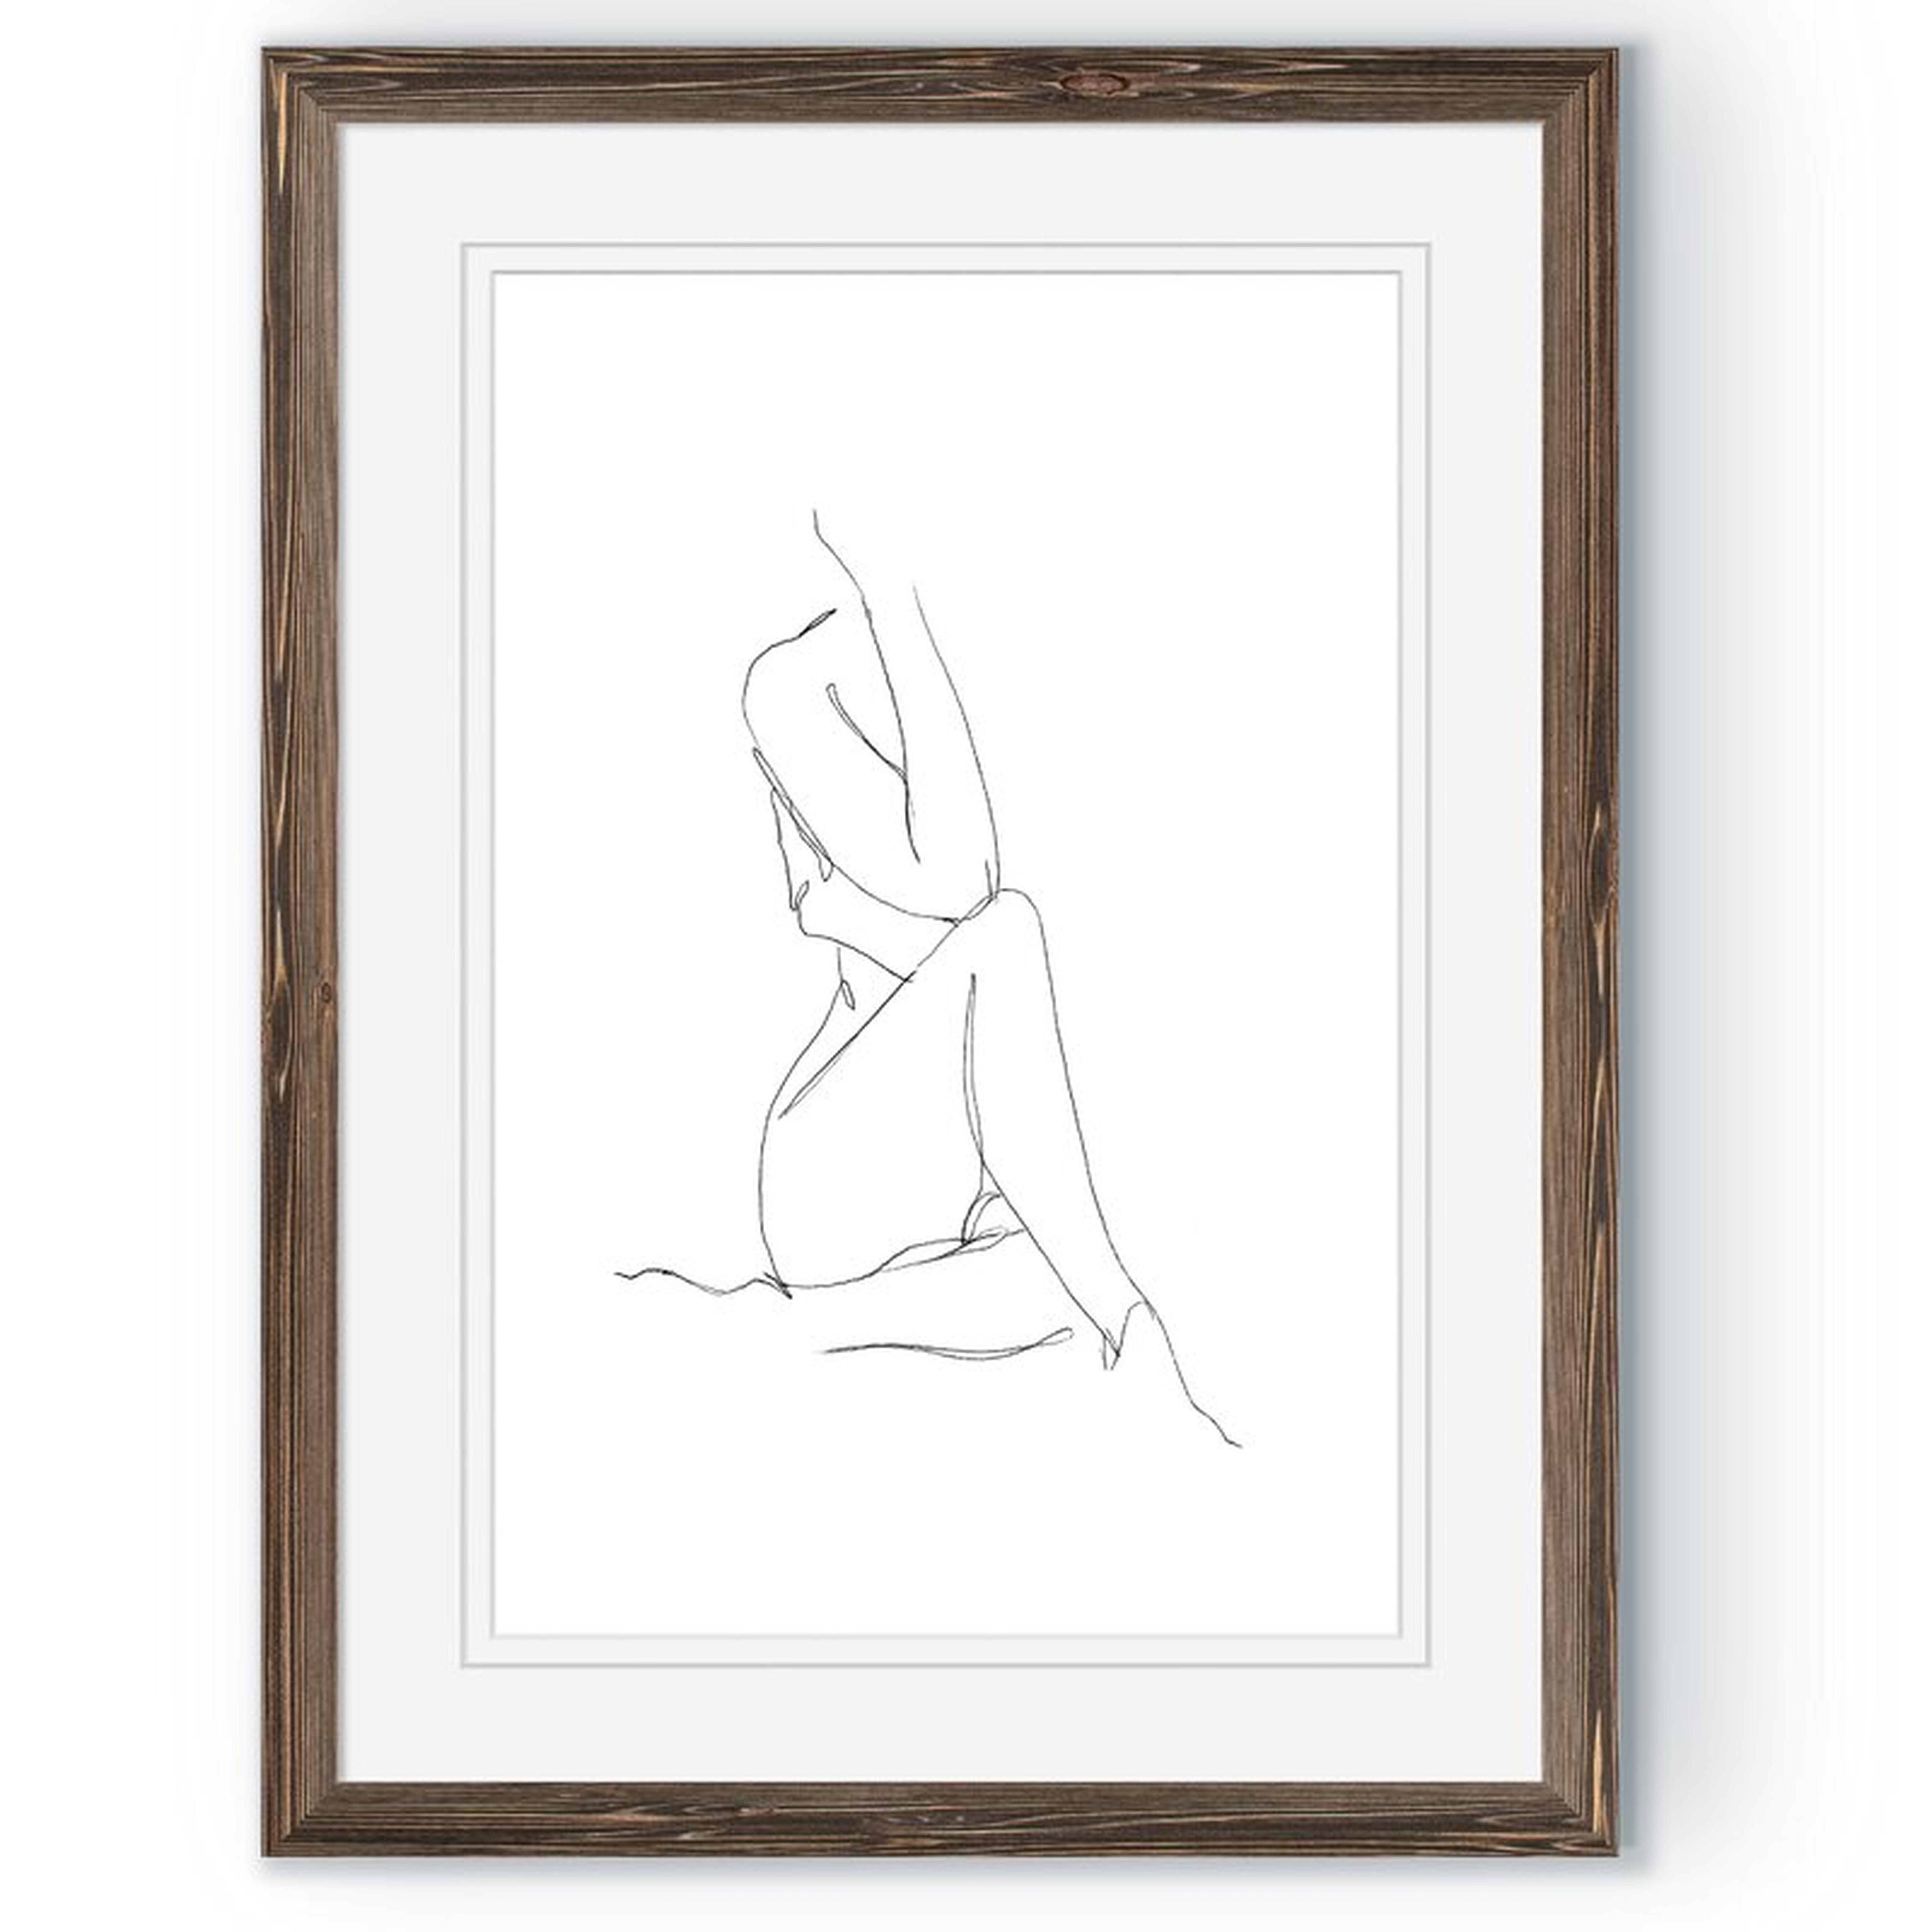 'Nude Contour Sketch I' by Paul Cezanne - Picture Frame Painting Print - Wayfair